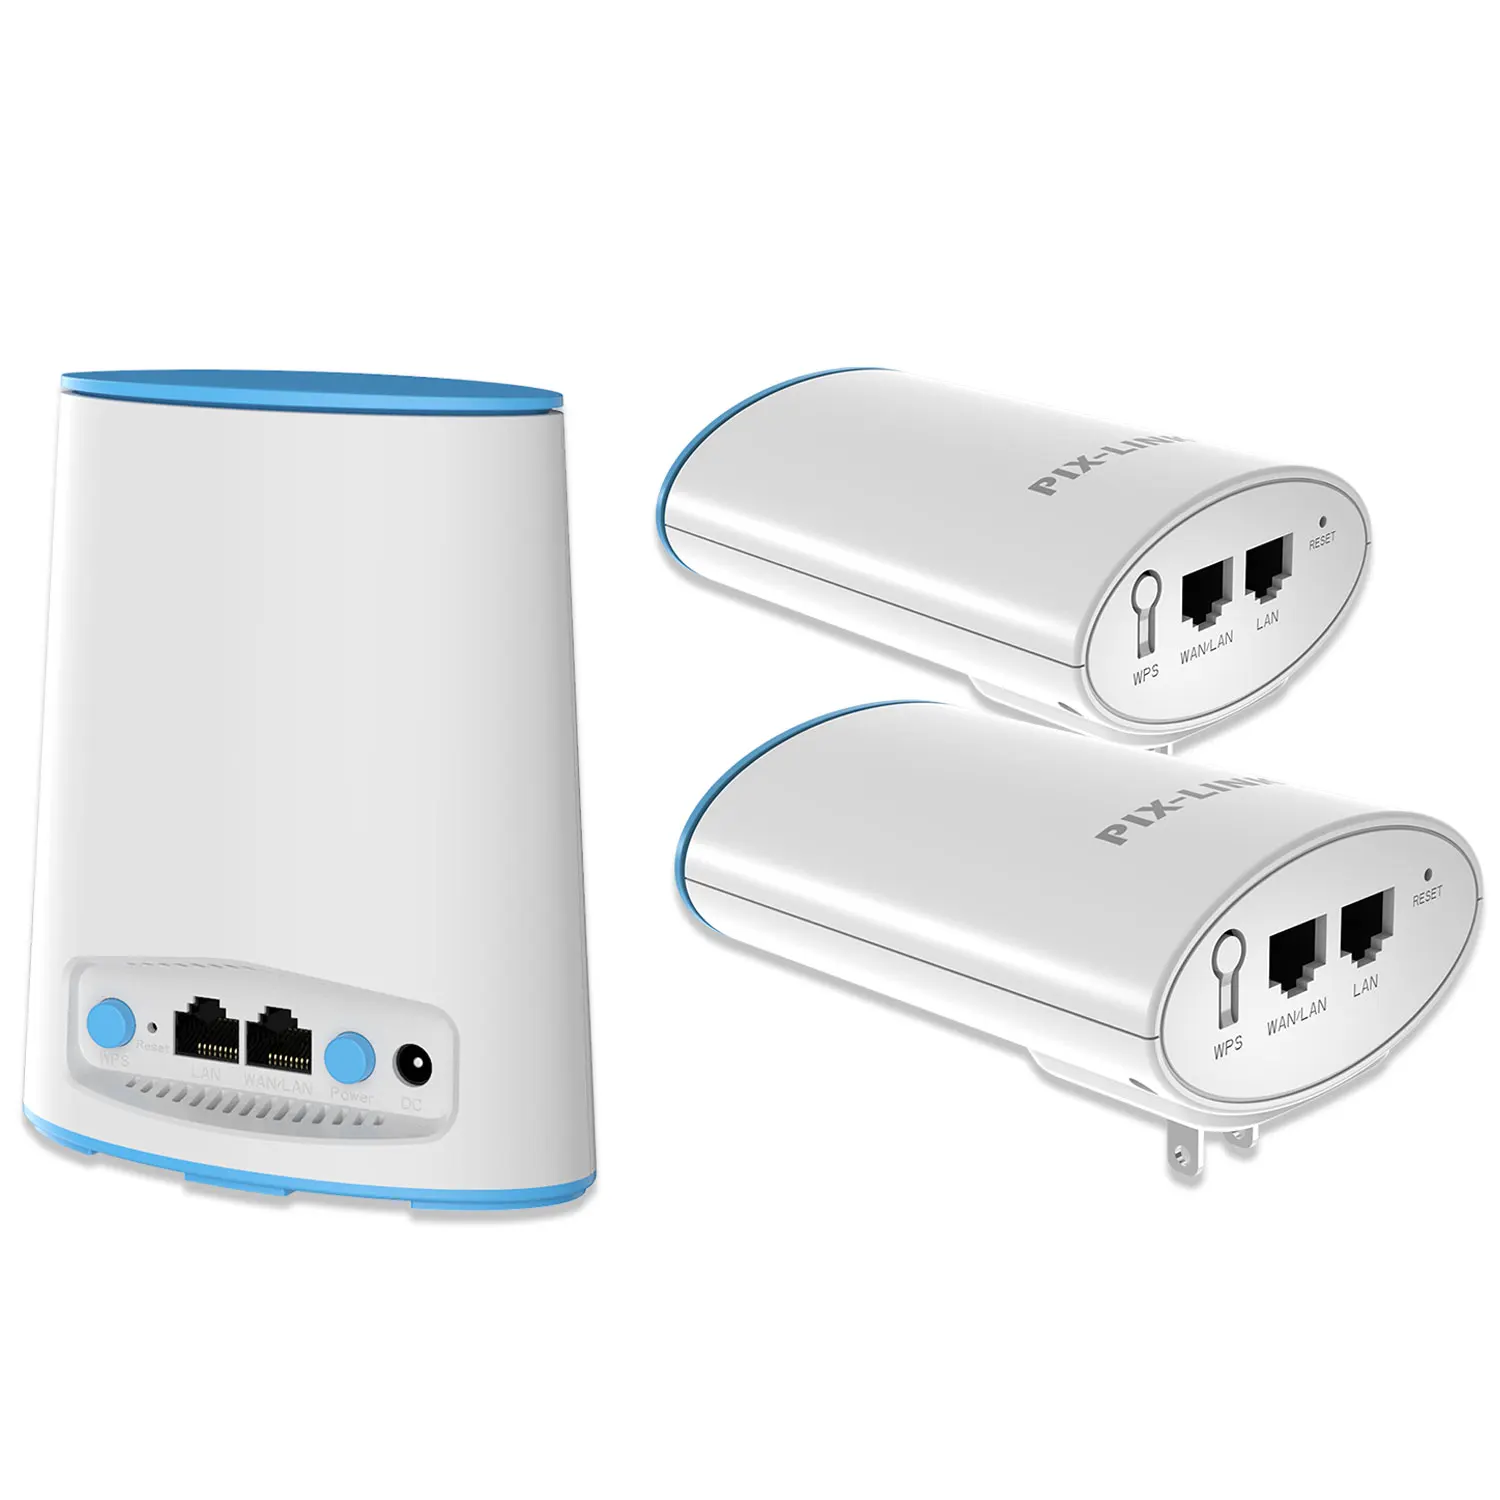 

2PCS Mi Router Mesh 2.4 5GHz WiFi Router High Speed 4 Core CPU 256MB Gigabit Power 4 Signal Amplifiers for Smart Home